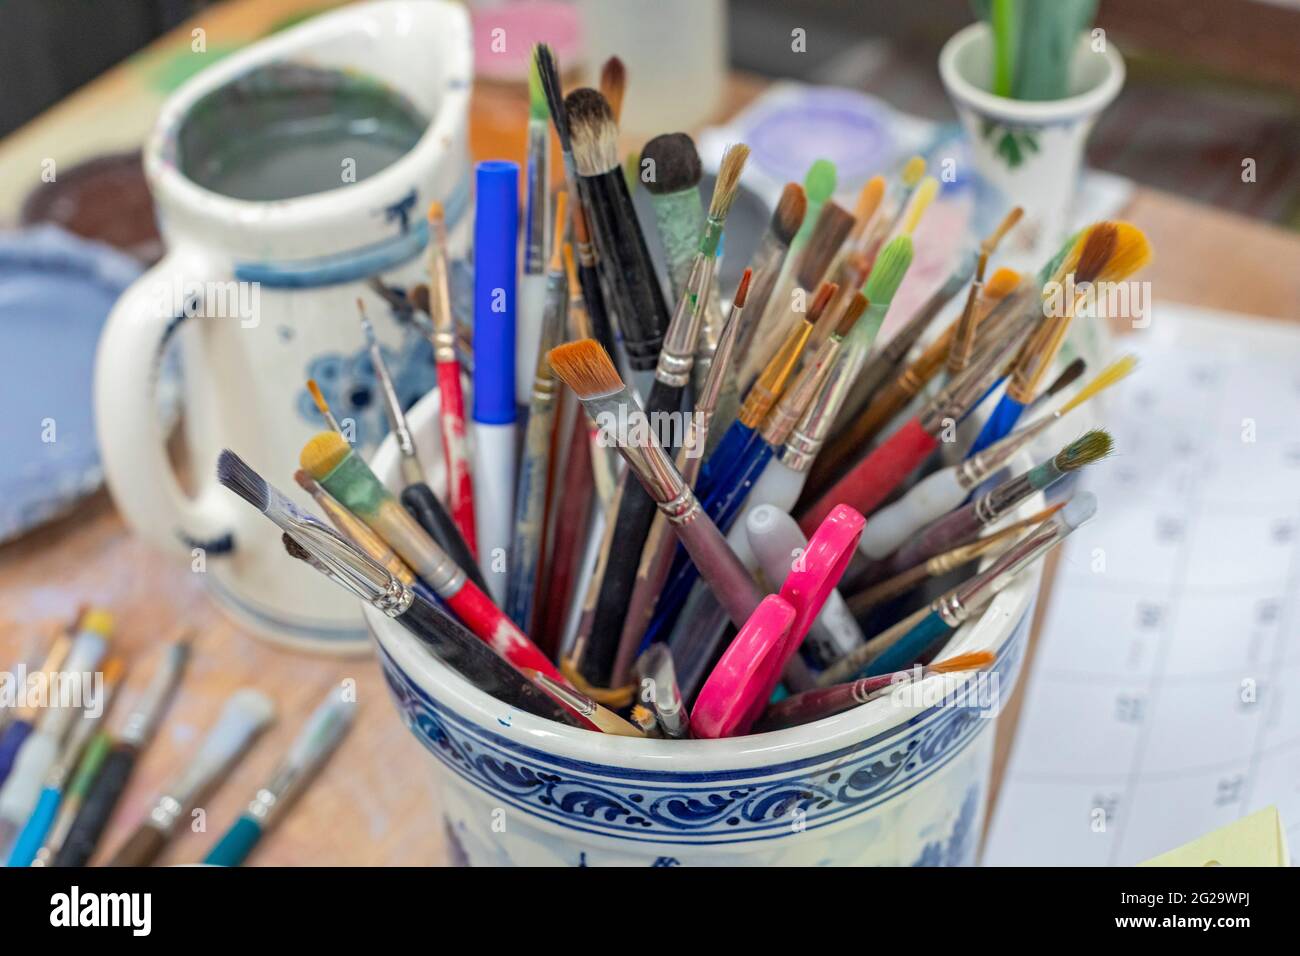 Holland, Michigan - Brushes used for painting Delftware at the De Klomp Wooden Shoe and Delft Factory, part of the Veldheer tulip farm. The city's Dut Stock Photo